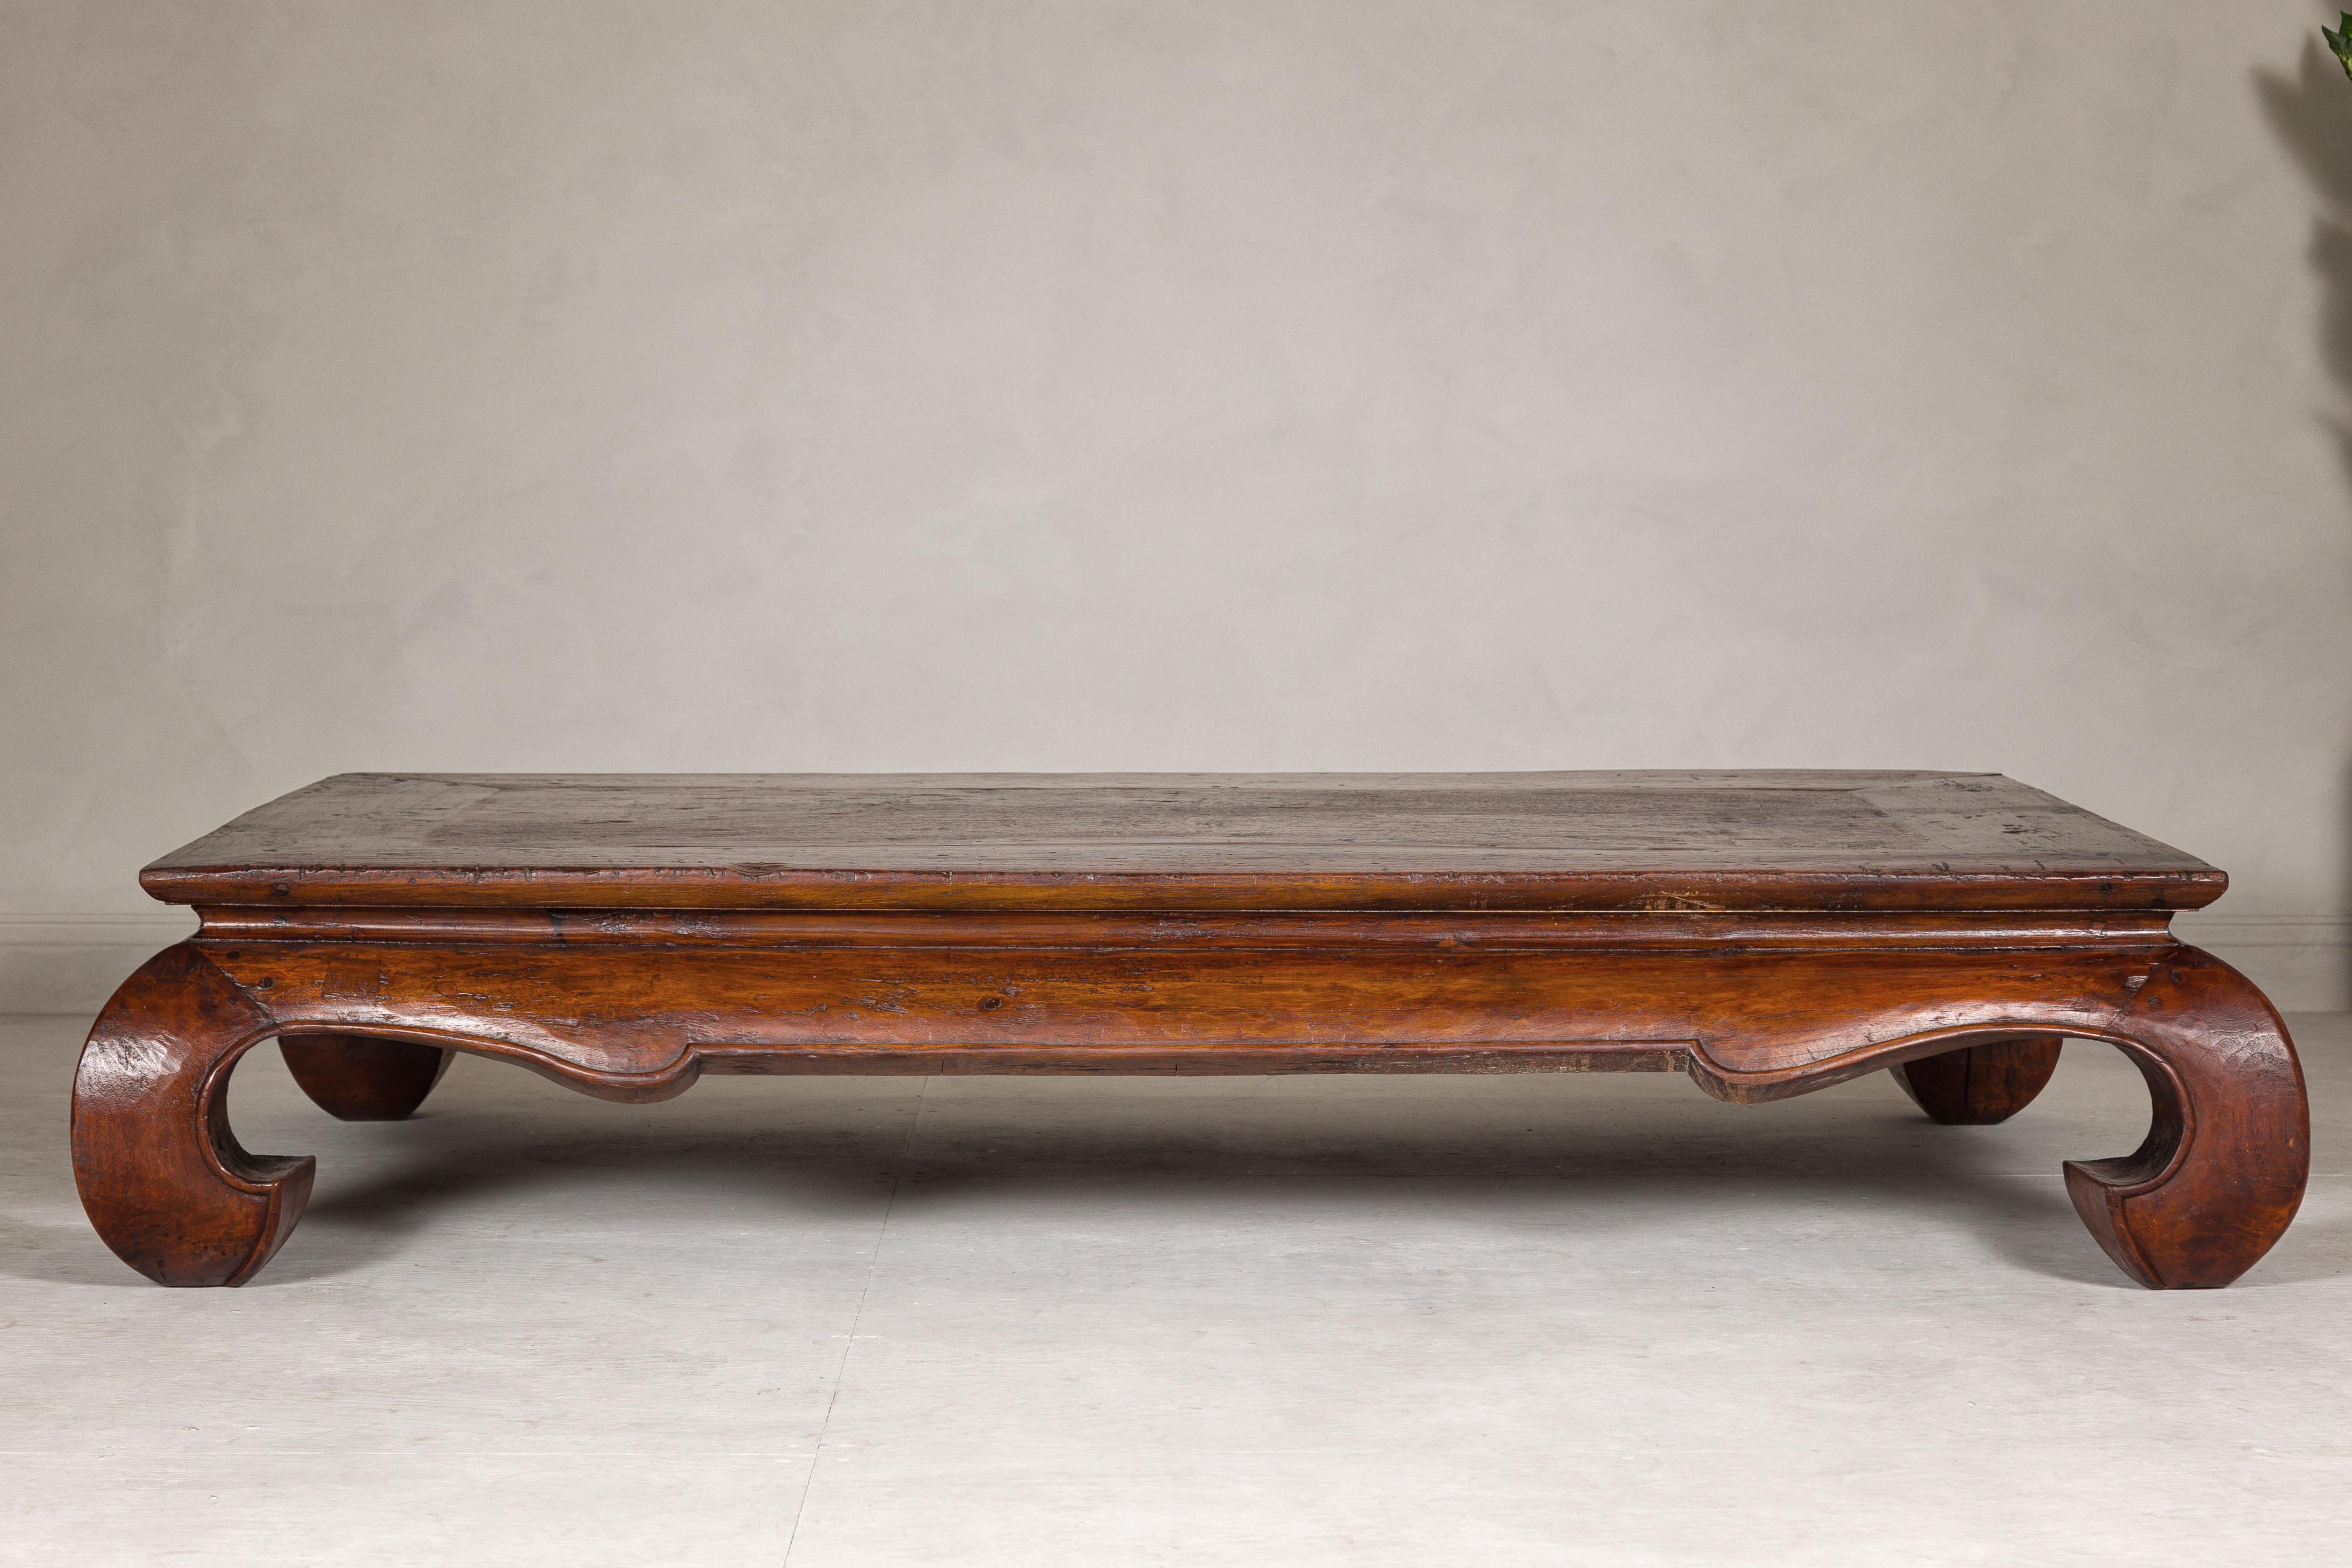 Chinese Qing Dynasty 19th Century Chow Leg Kang Table with Weathered Rustic Patina For Sale